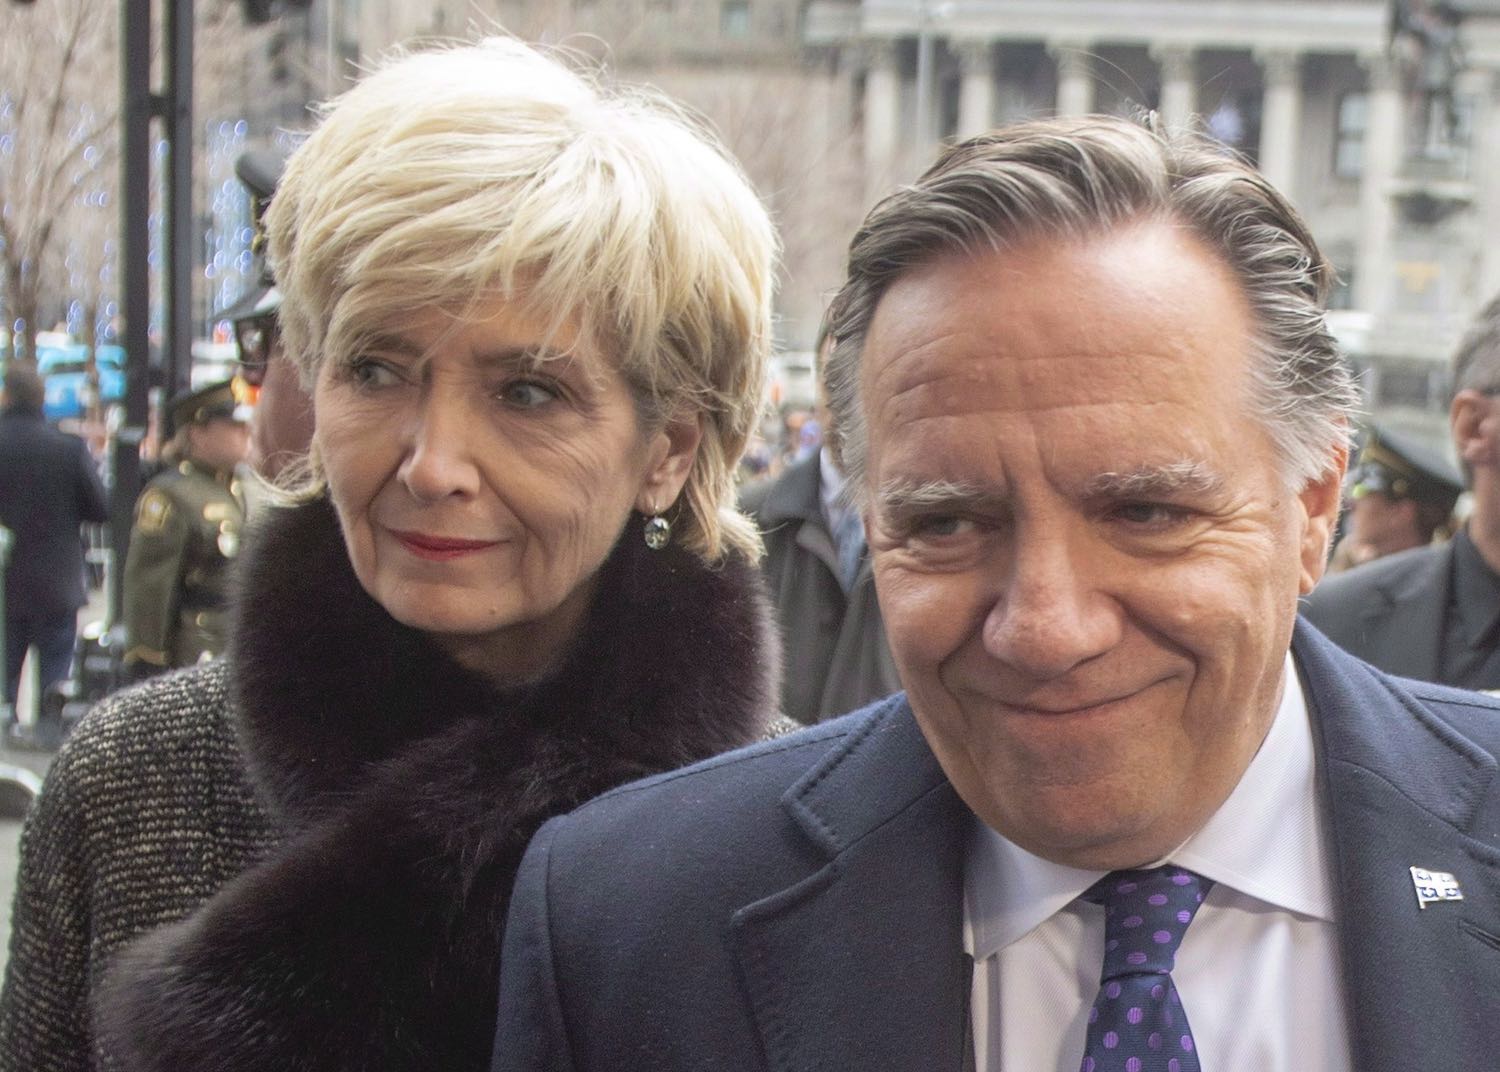 Quebec Premier Francois Legault arrives with his wife, Isabelle Brais, for funeral services for former Quebec premier Bernard Landry at Notre-Dame Basilica Tuesday, November 13, 2018 in Montreal. Landry passed away last week at the age of 81.THE CANADIAN PRESS/Ryan Remiorz